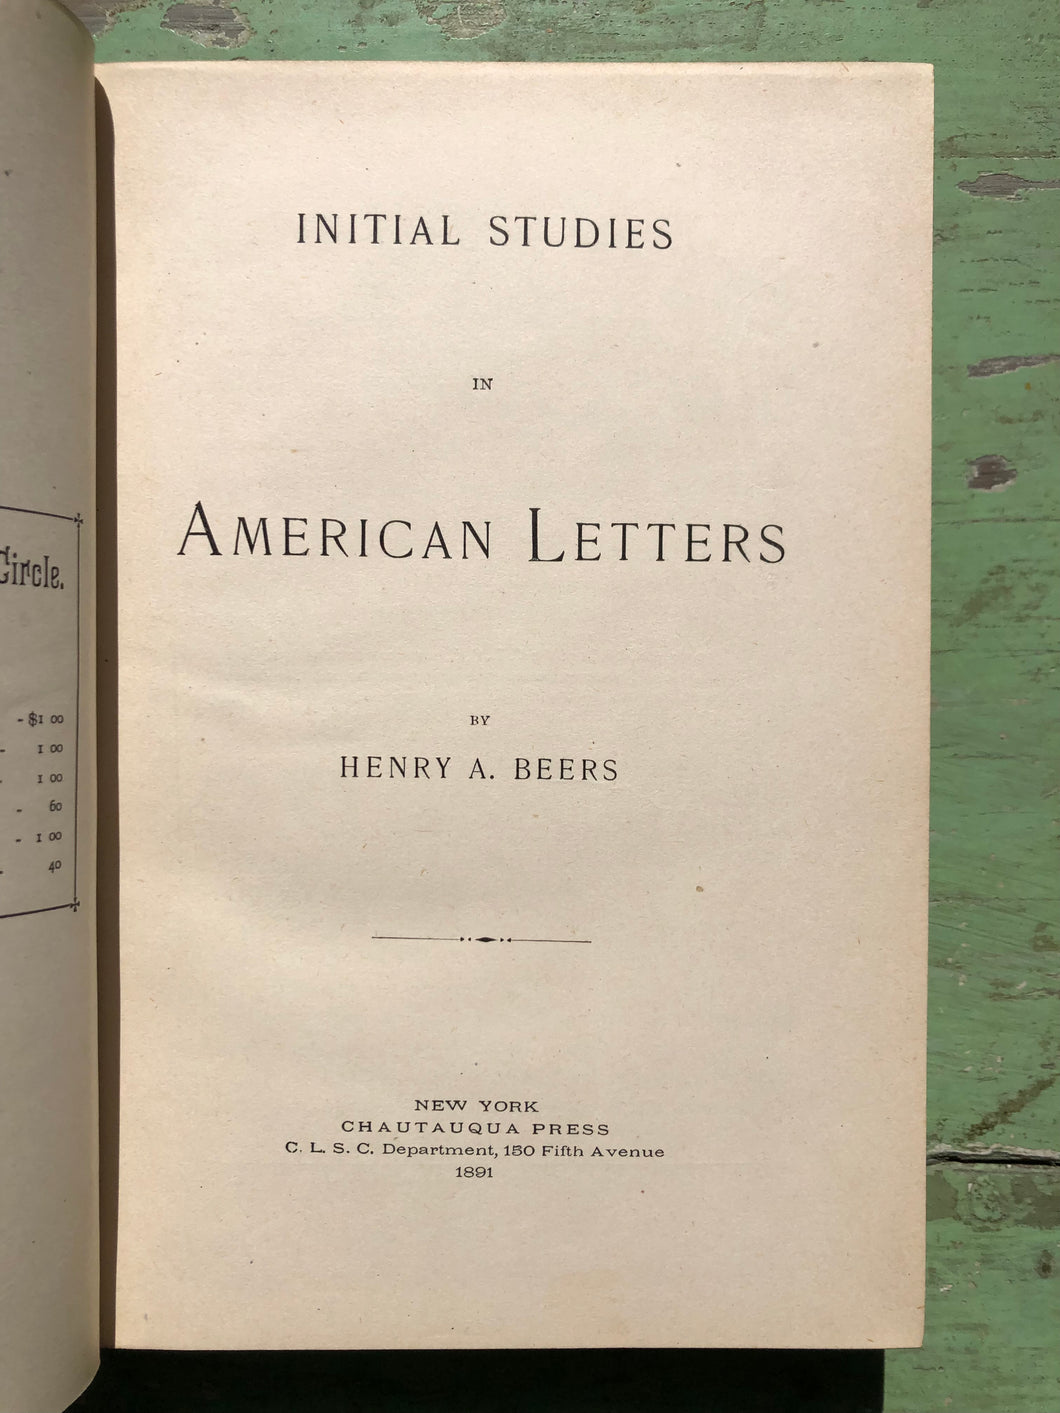 Initial Studies in American Letters. by Henry A. Beers